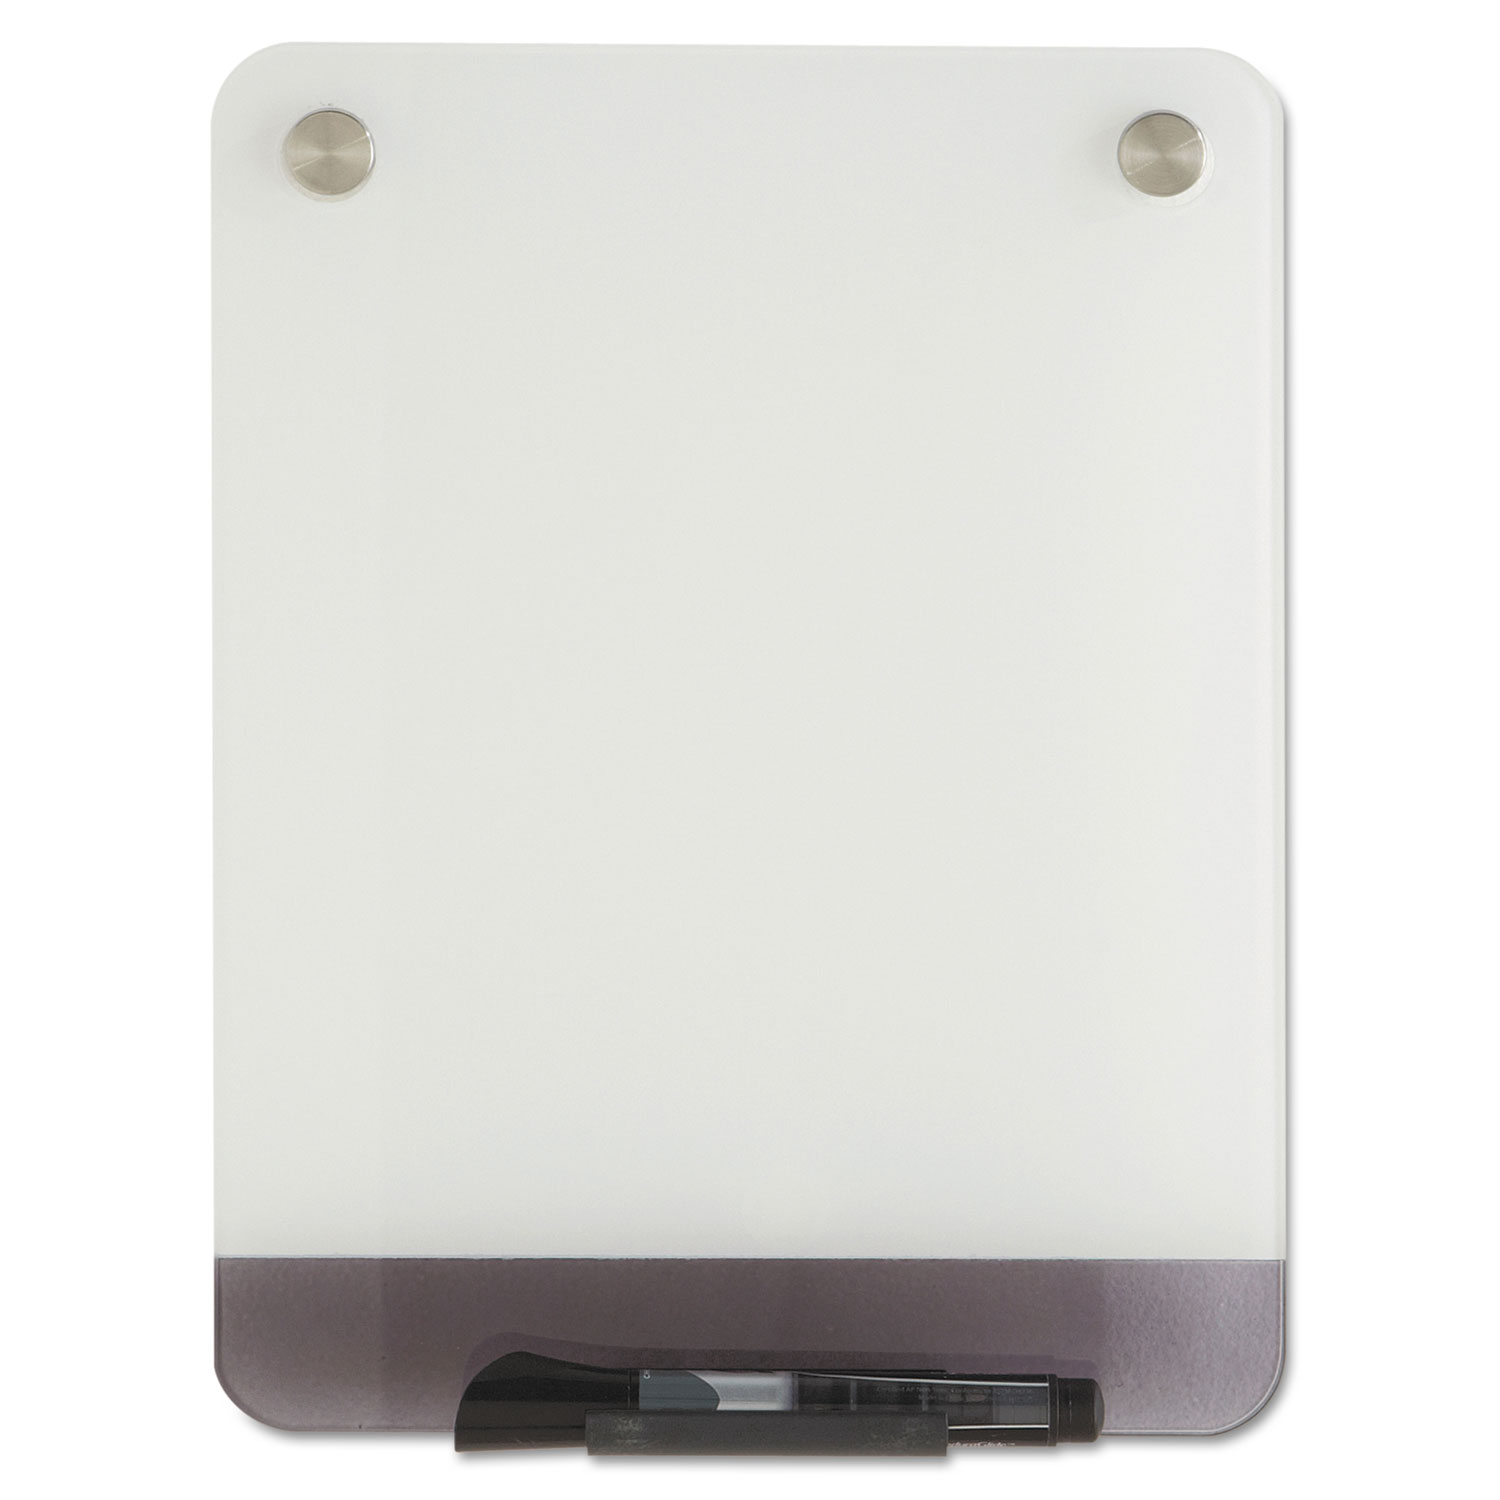  Iceberg 31110 Clarity Glass Personal Dry Erase Boards, Ultra-White Backing, 9 x 12 (ICE31110) 